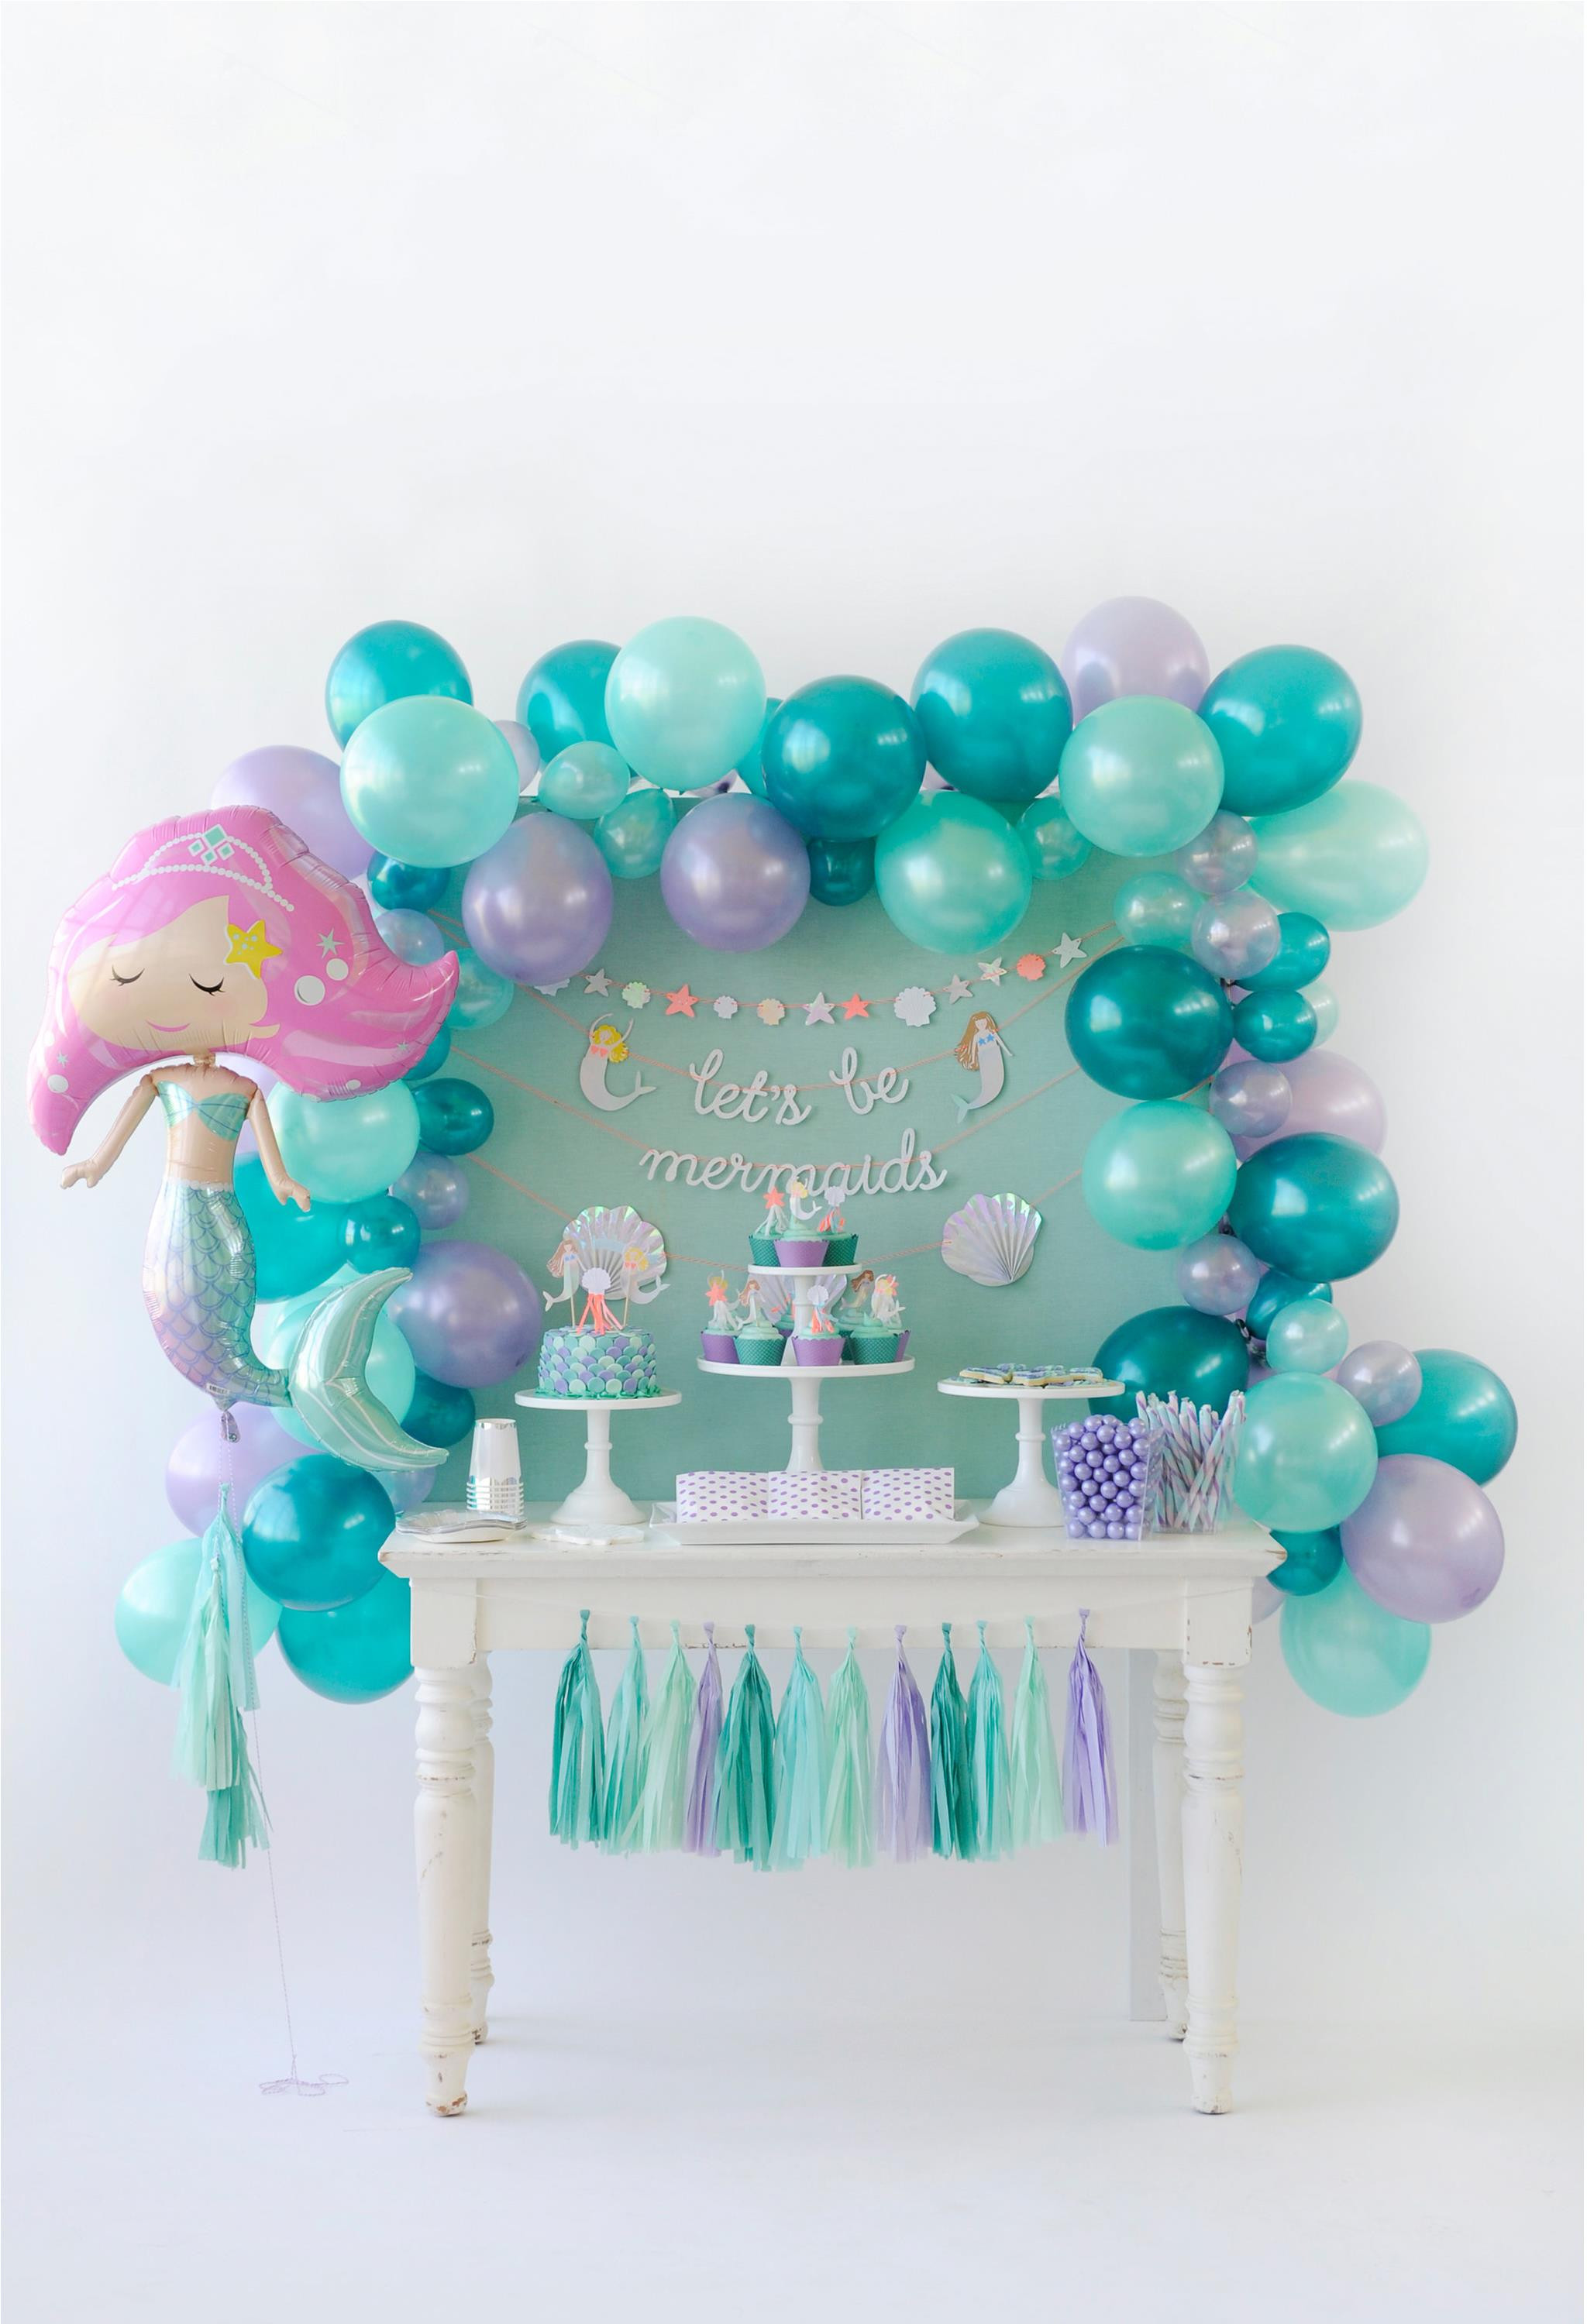 Pinterest Mermaid Party Ideas
 Splash Over to this Adorable Mermaid Party Project